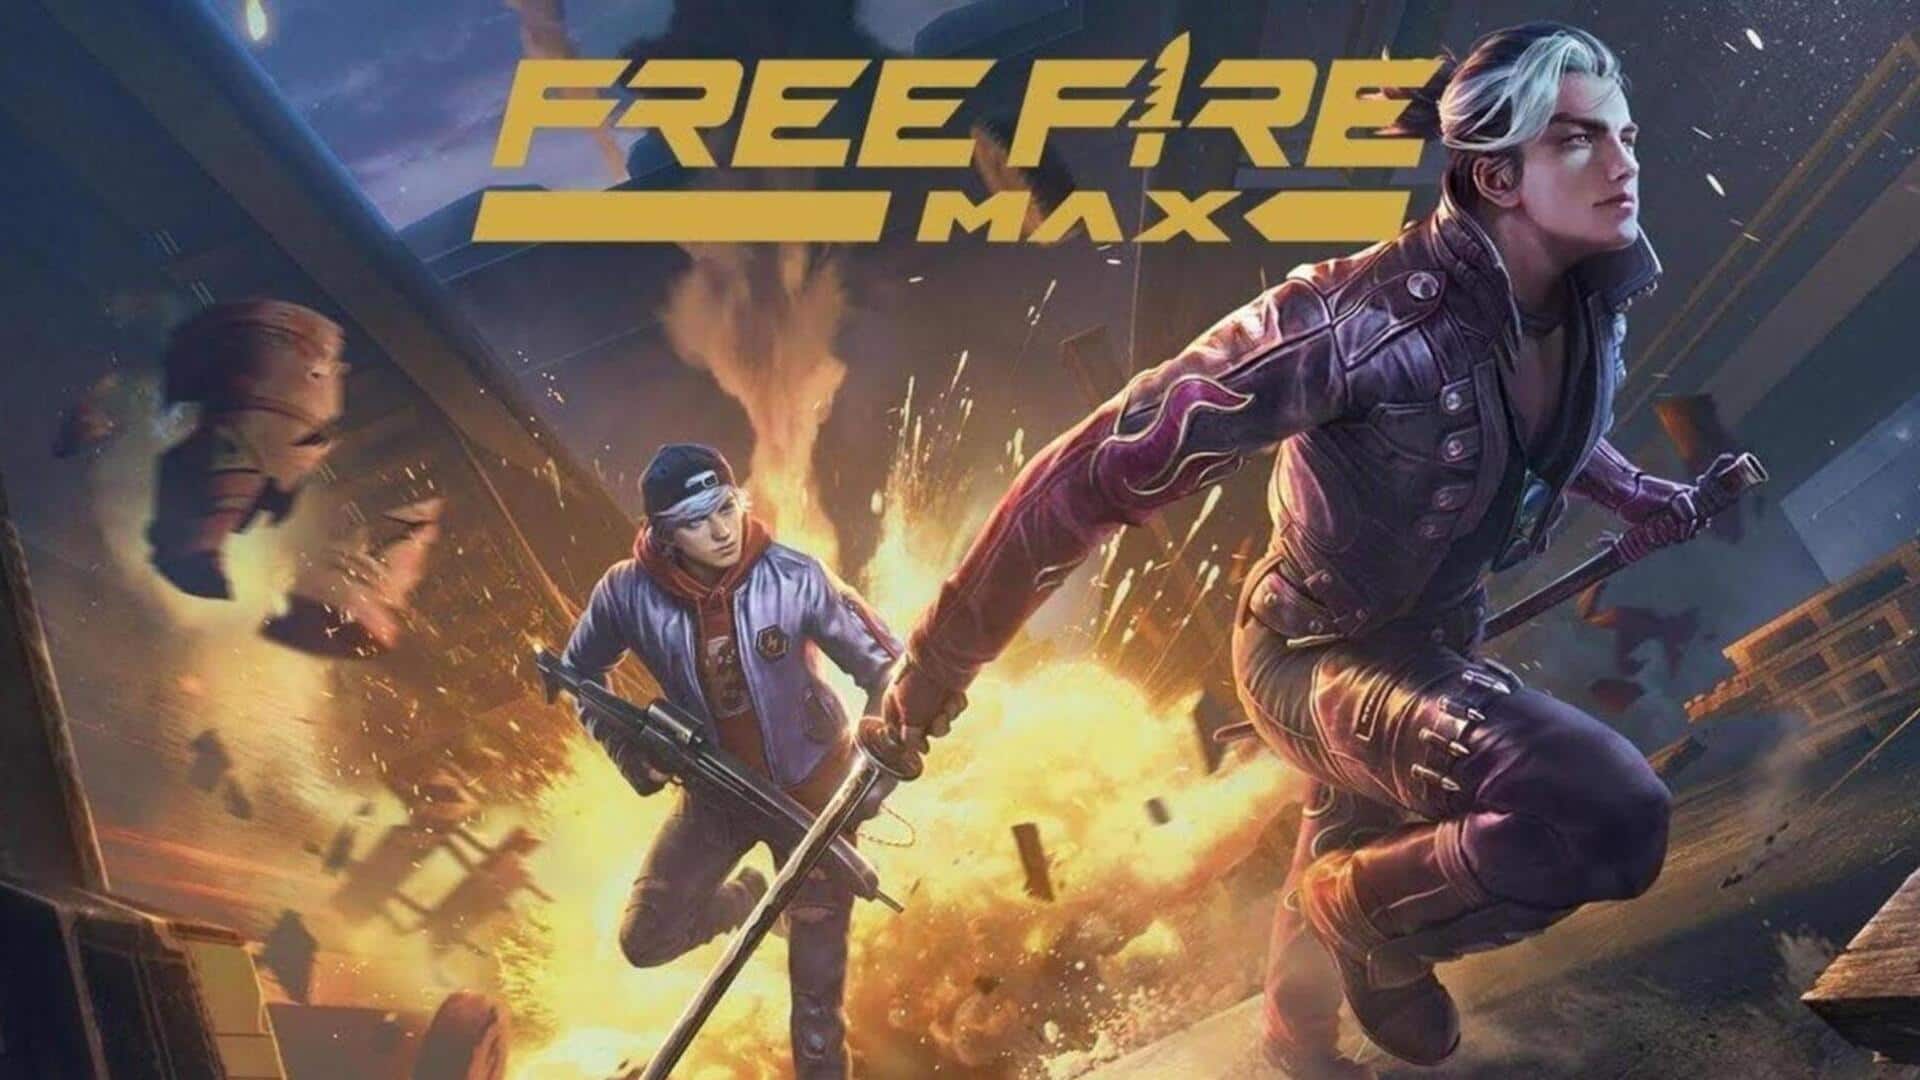 Free Fire MAX codes for November 2: Claim exclusive rewards